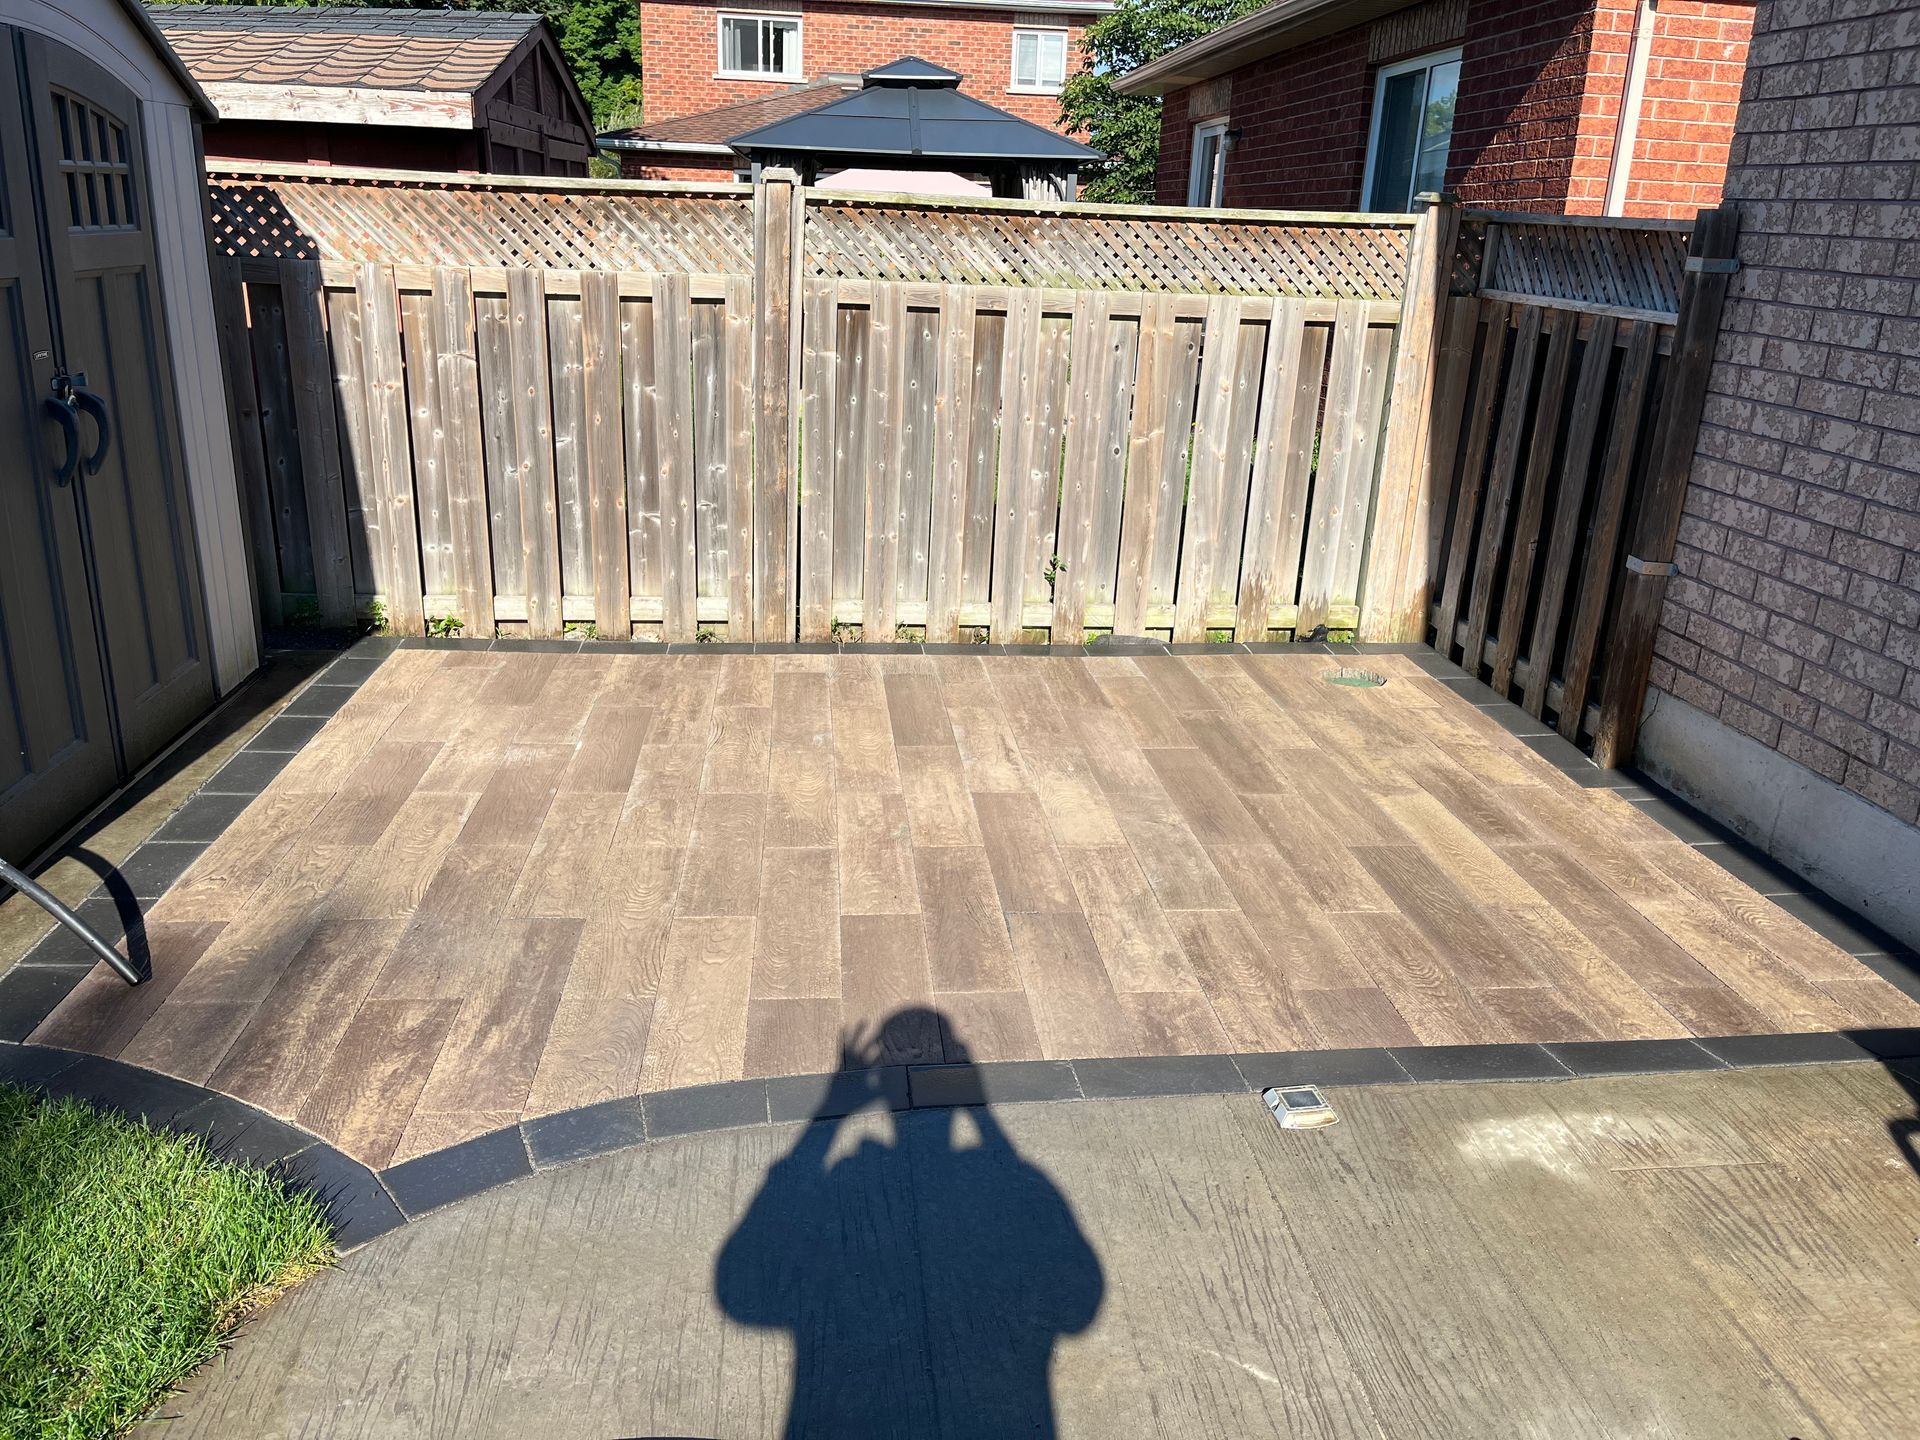 a shadow of a person is cast on a tiled patio in front of a wooden fence .